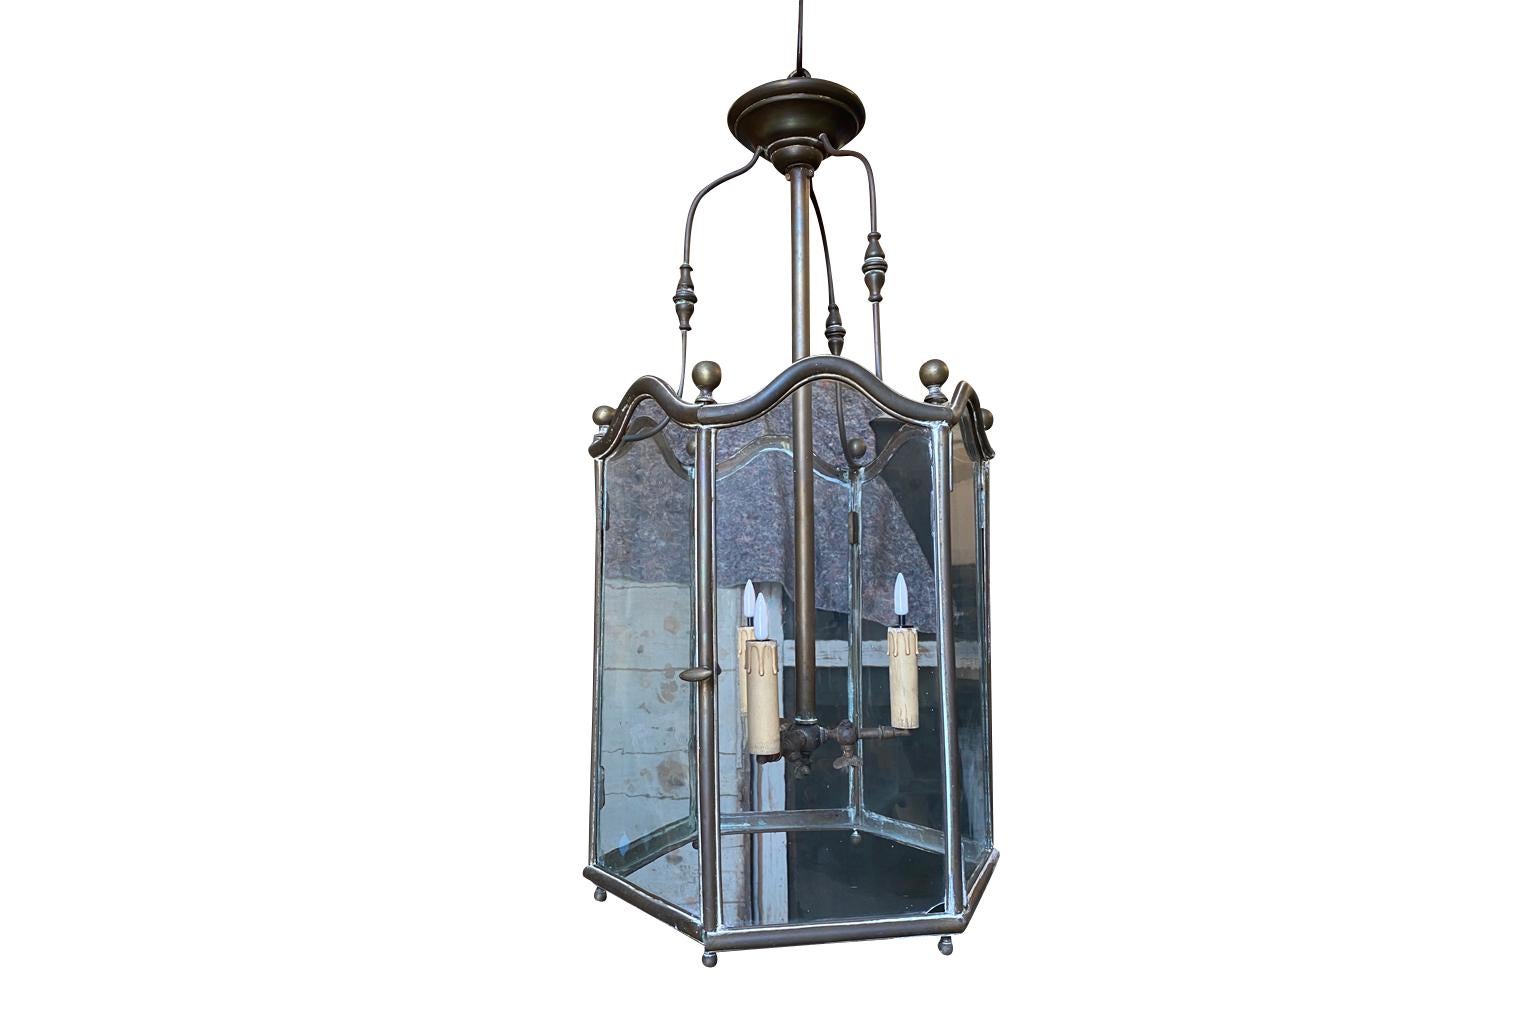 French Early 19th Century Empire Lantern In Good Condition For Sale In Atlanta, GA